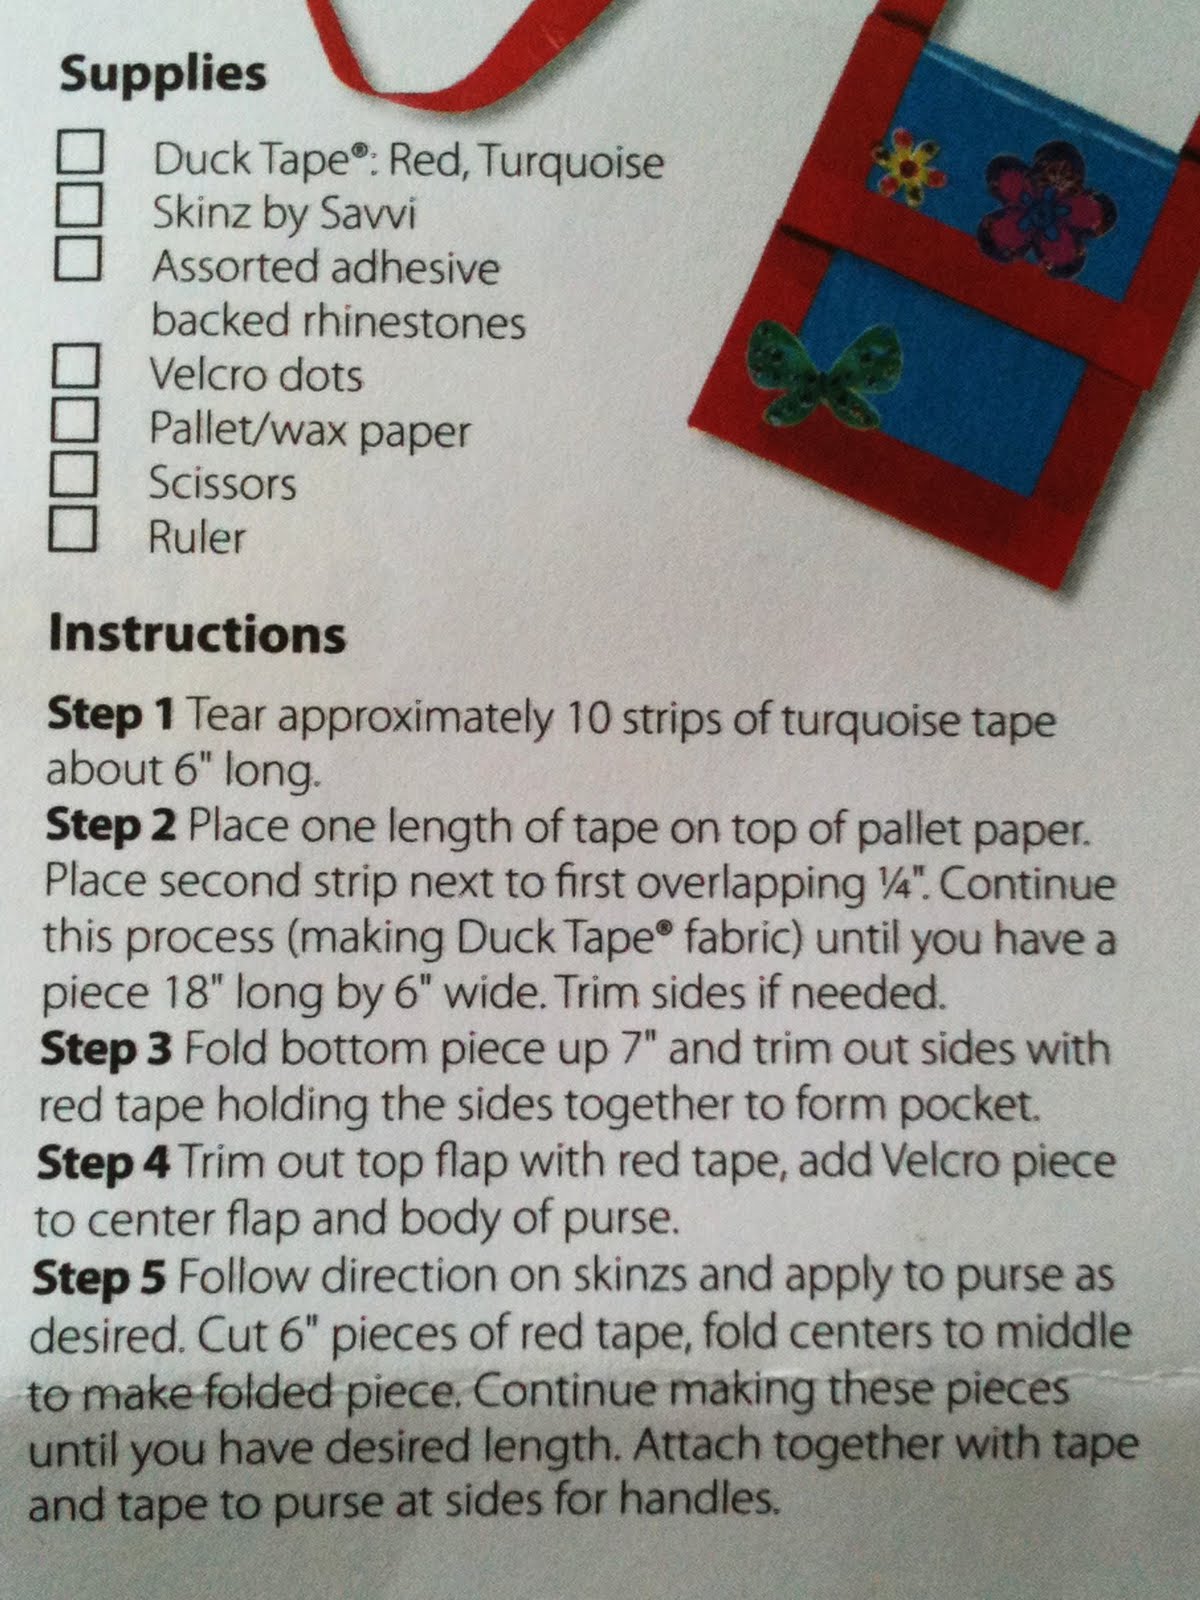 duct-tape-wallet-instructions-printable-that-are-remarkable-lucas-website